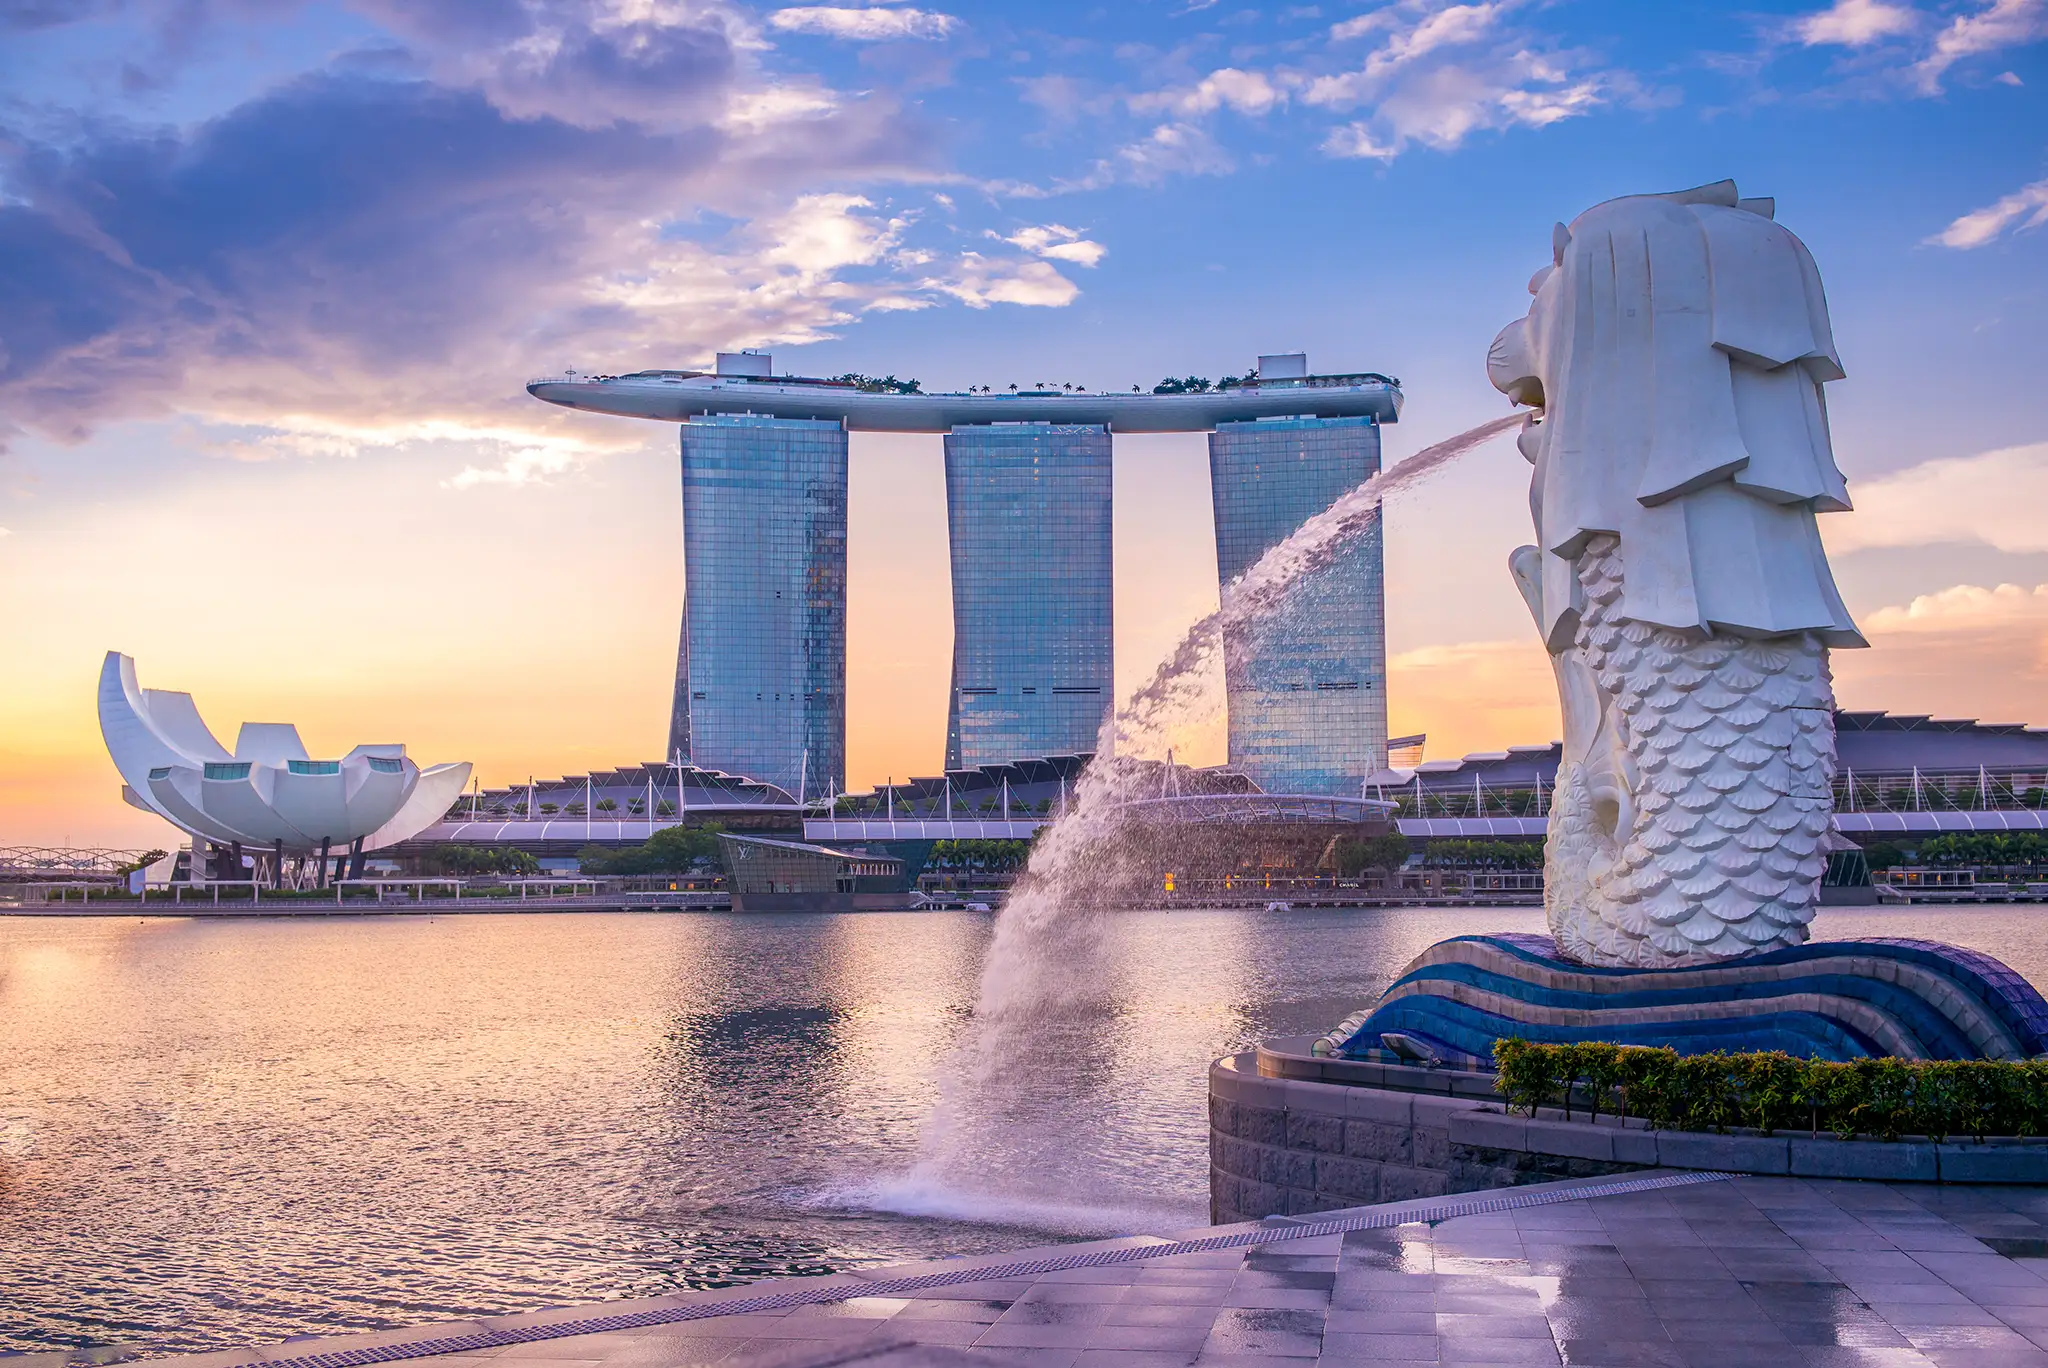 Silhouette of Merlion Statue in Singapore with Marina Bay Sands in the background.